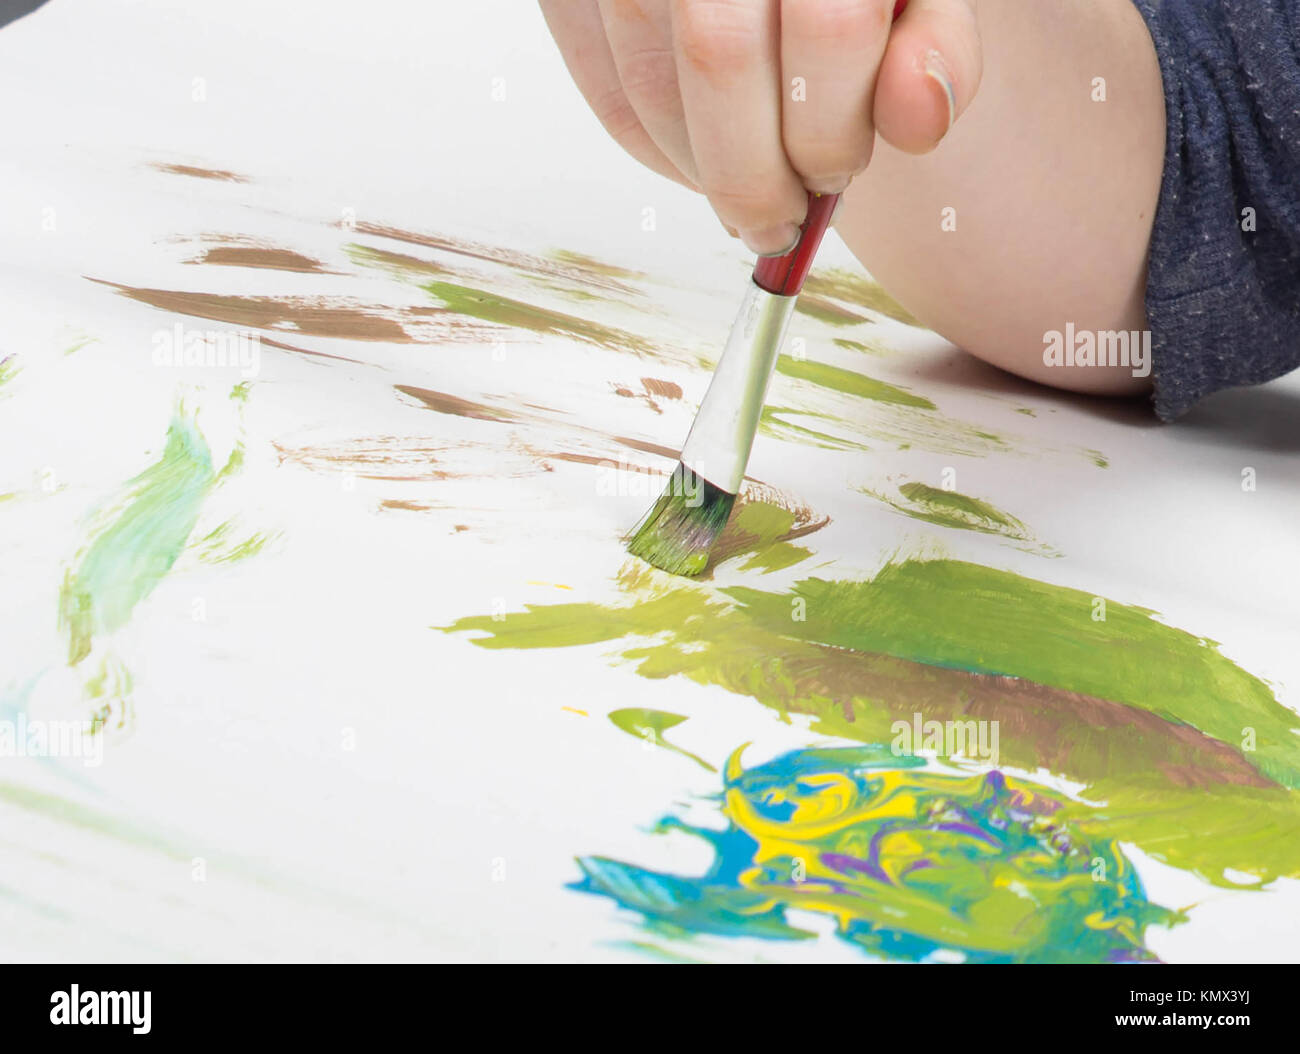 young child playing with paint brush in splattered paint on a white background Stock Photo